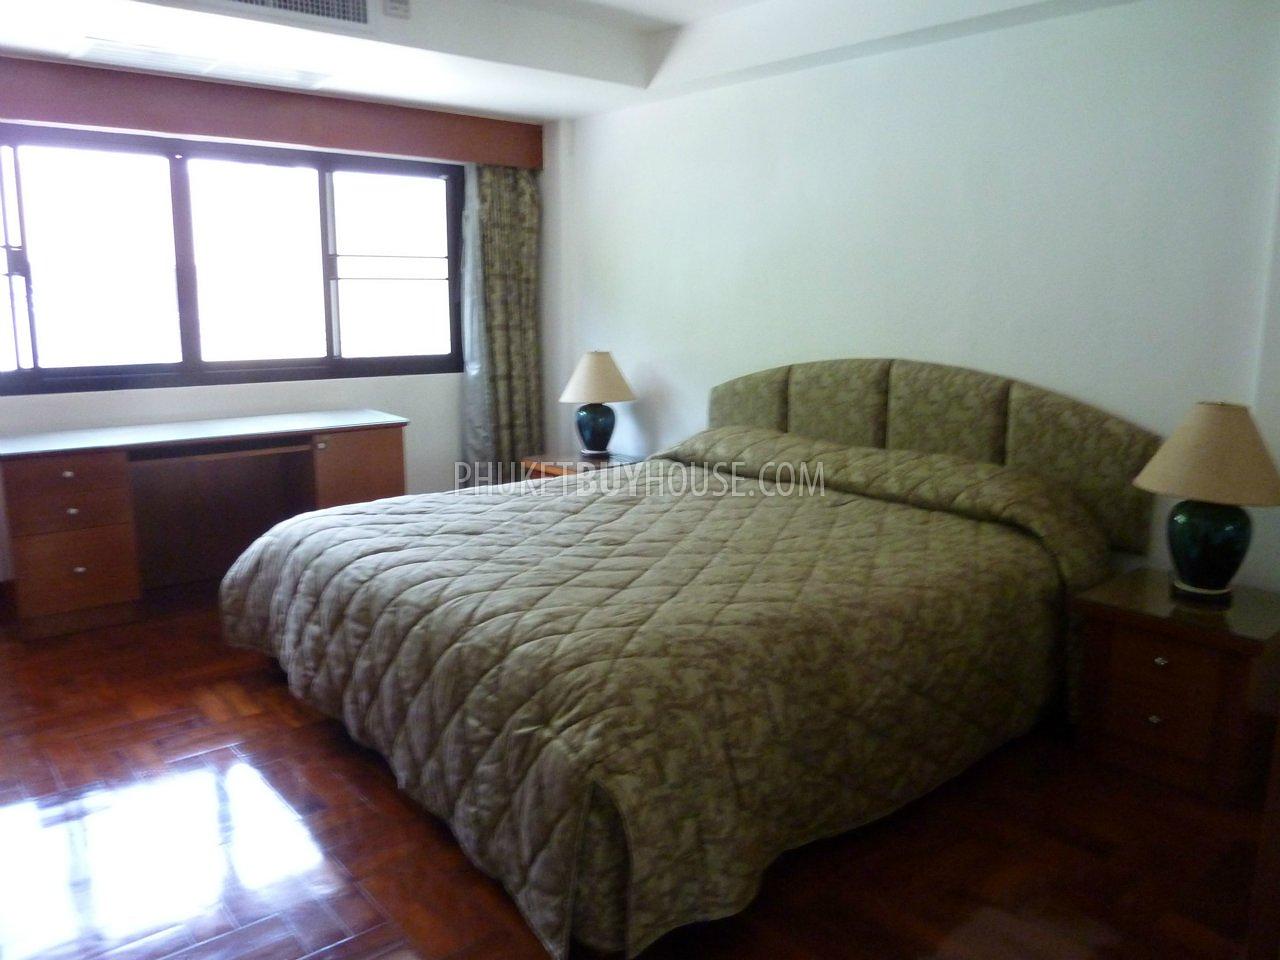 NAI2456: Freehold: Very nice 2 bedr. apartment (top floor), fully furnished, near beautiful Nai Harn Beach. Фото #28